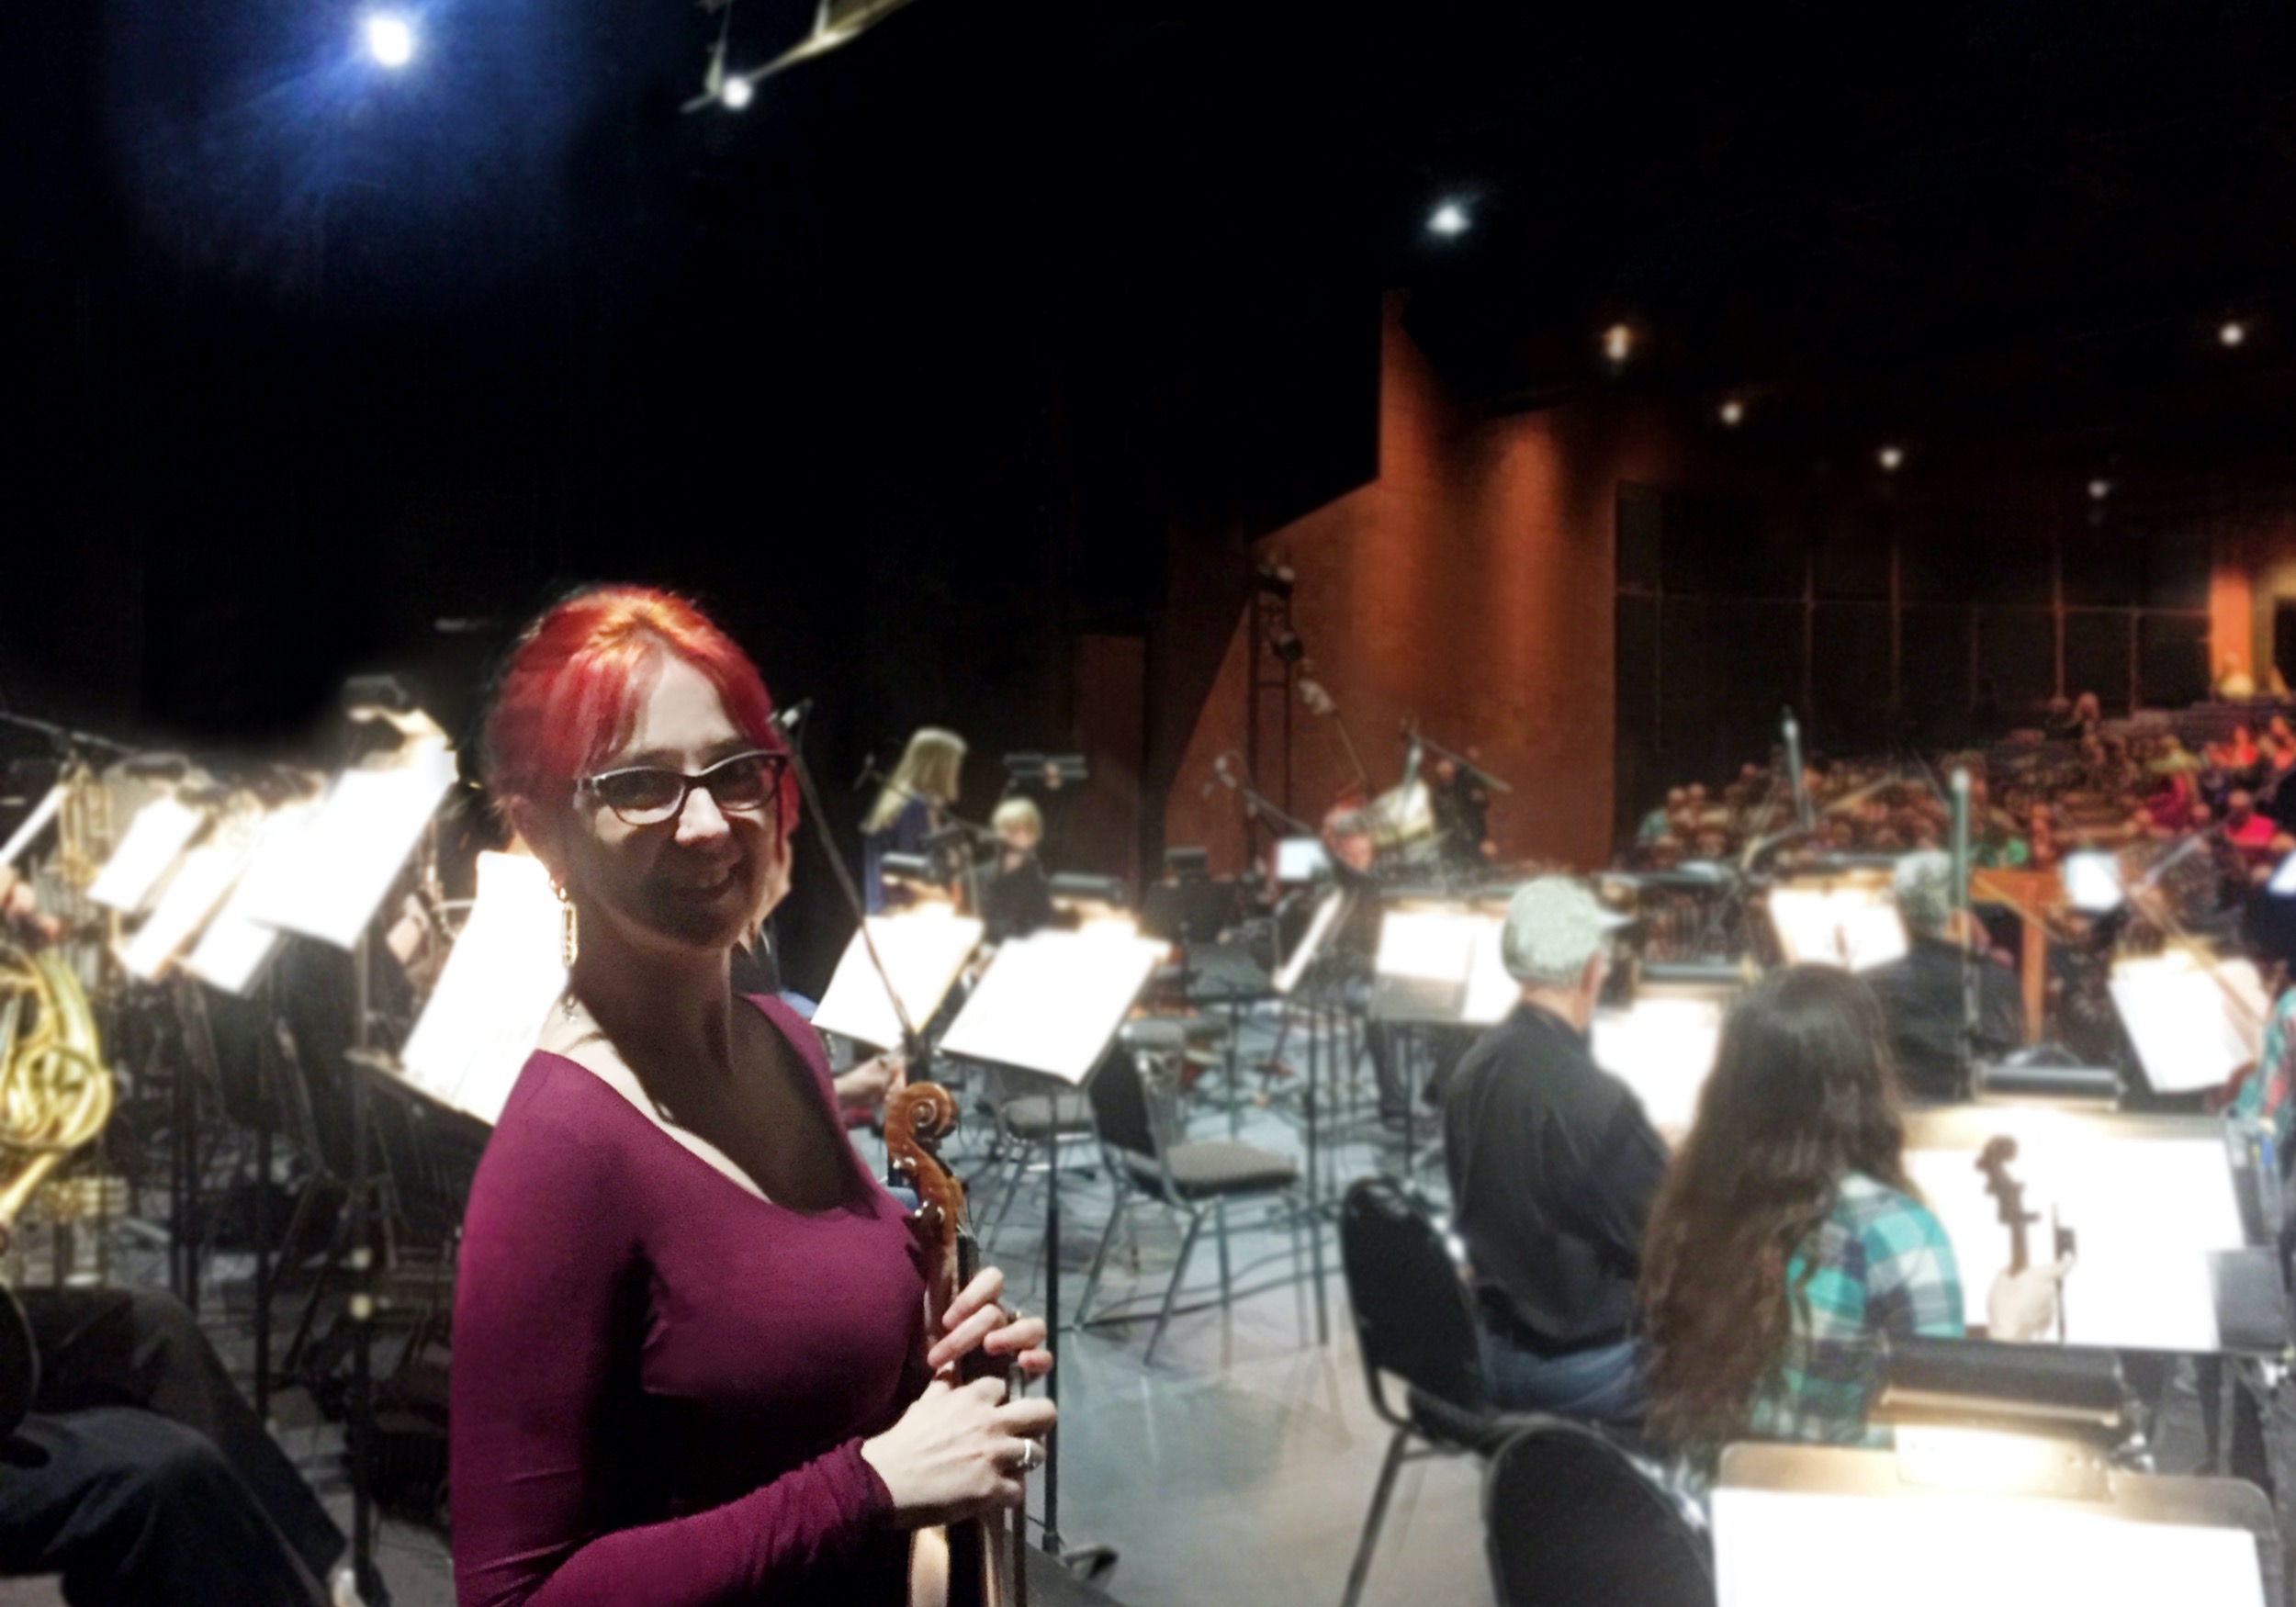 Rhiannon standing on stage with the Okanagan symphony orchestra warming up around her